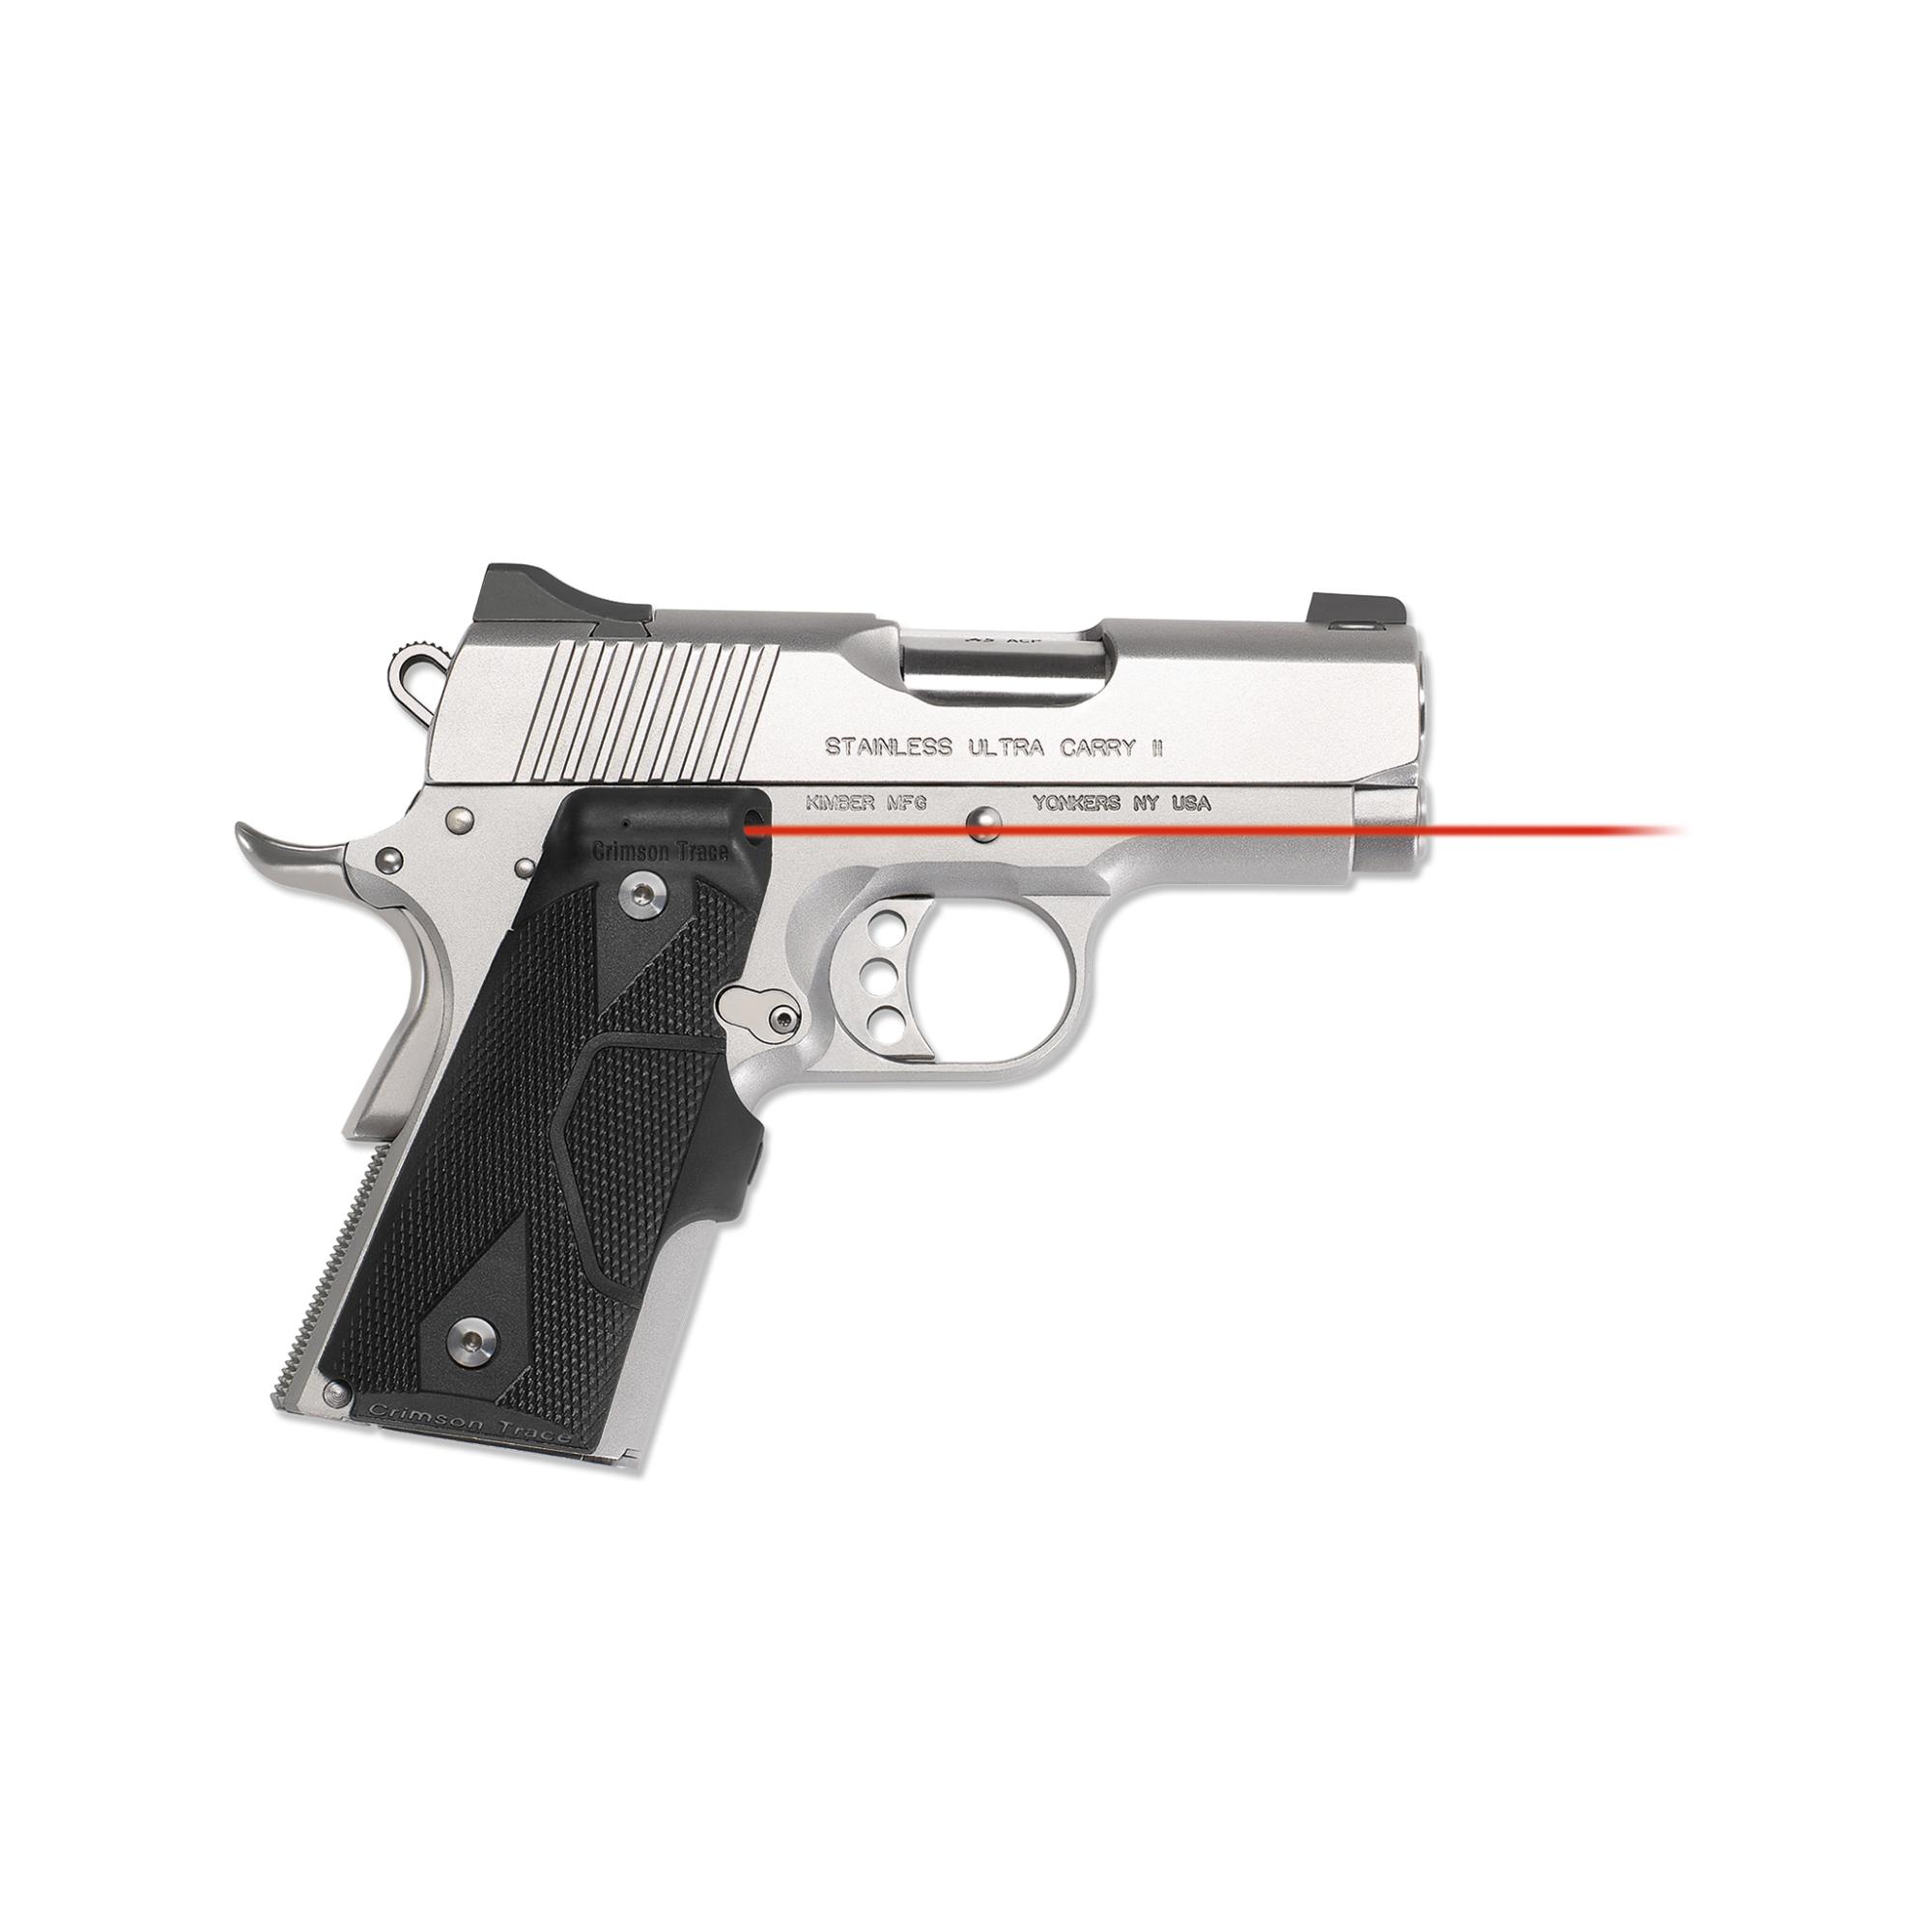 LG-404 KMI Front Activation Lasergrips® Slate Gray with Kimber 